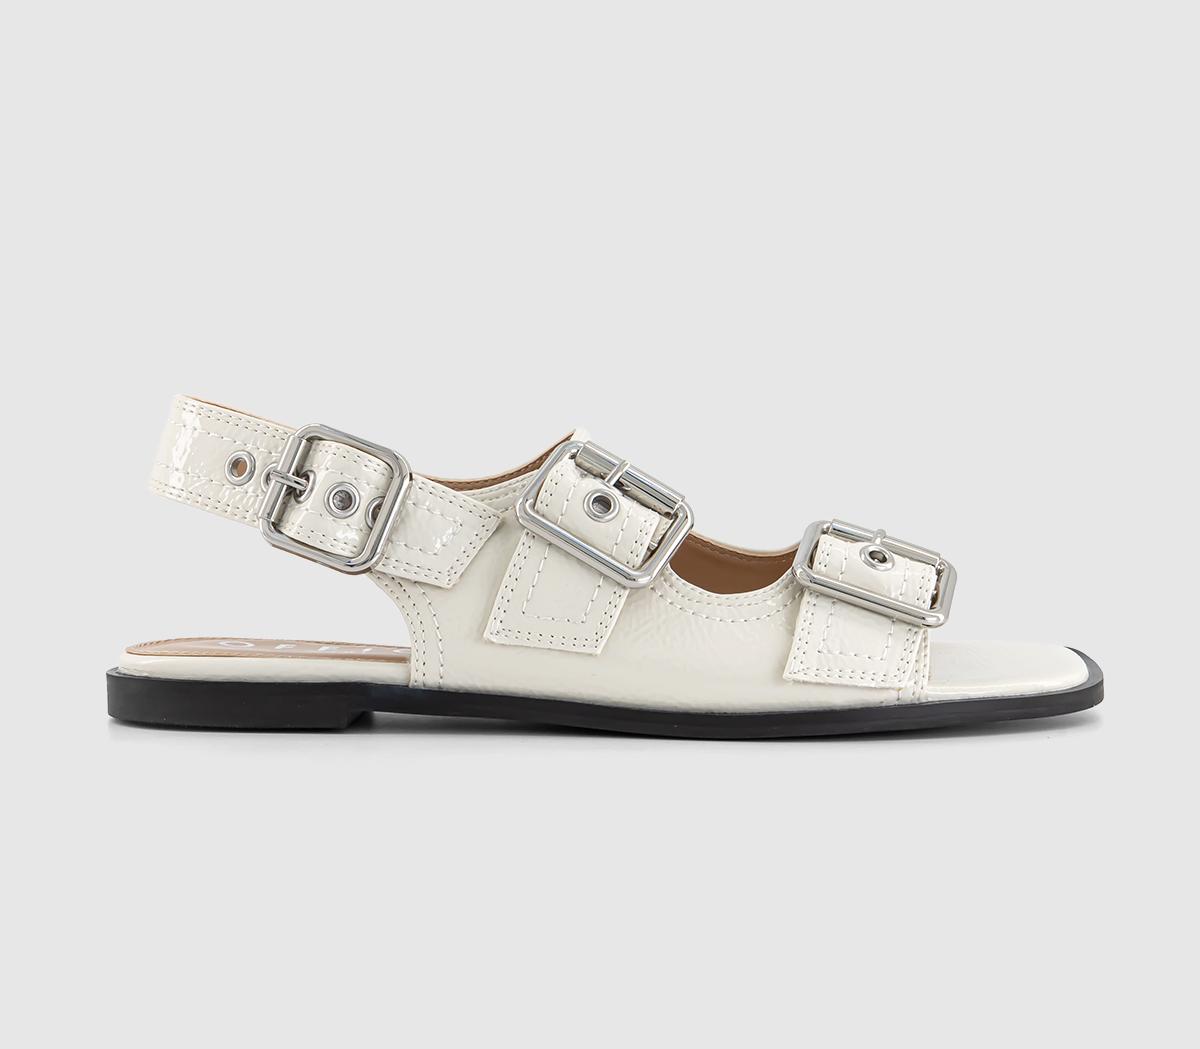 OFFICEStealth Double Buckle Contrast Stitch SandalsOff White